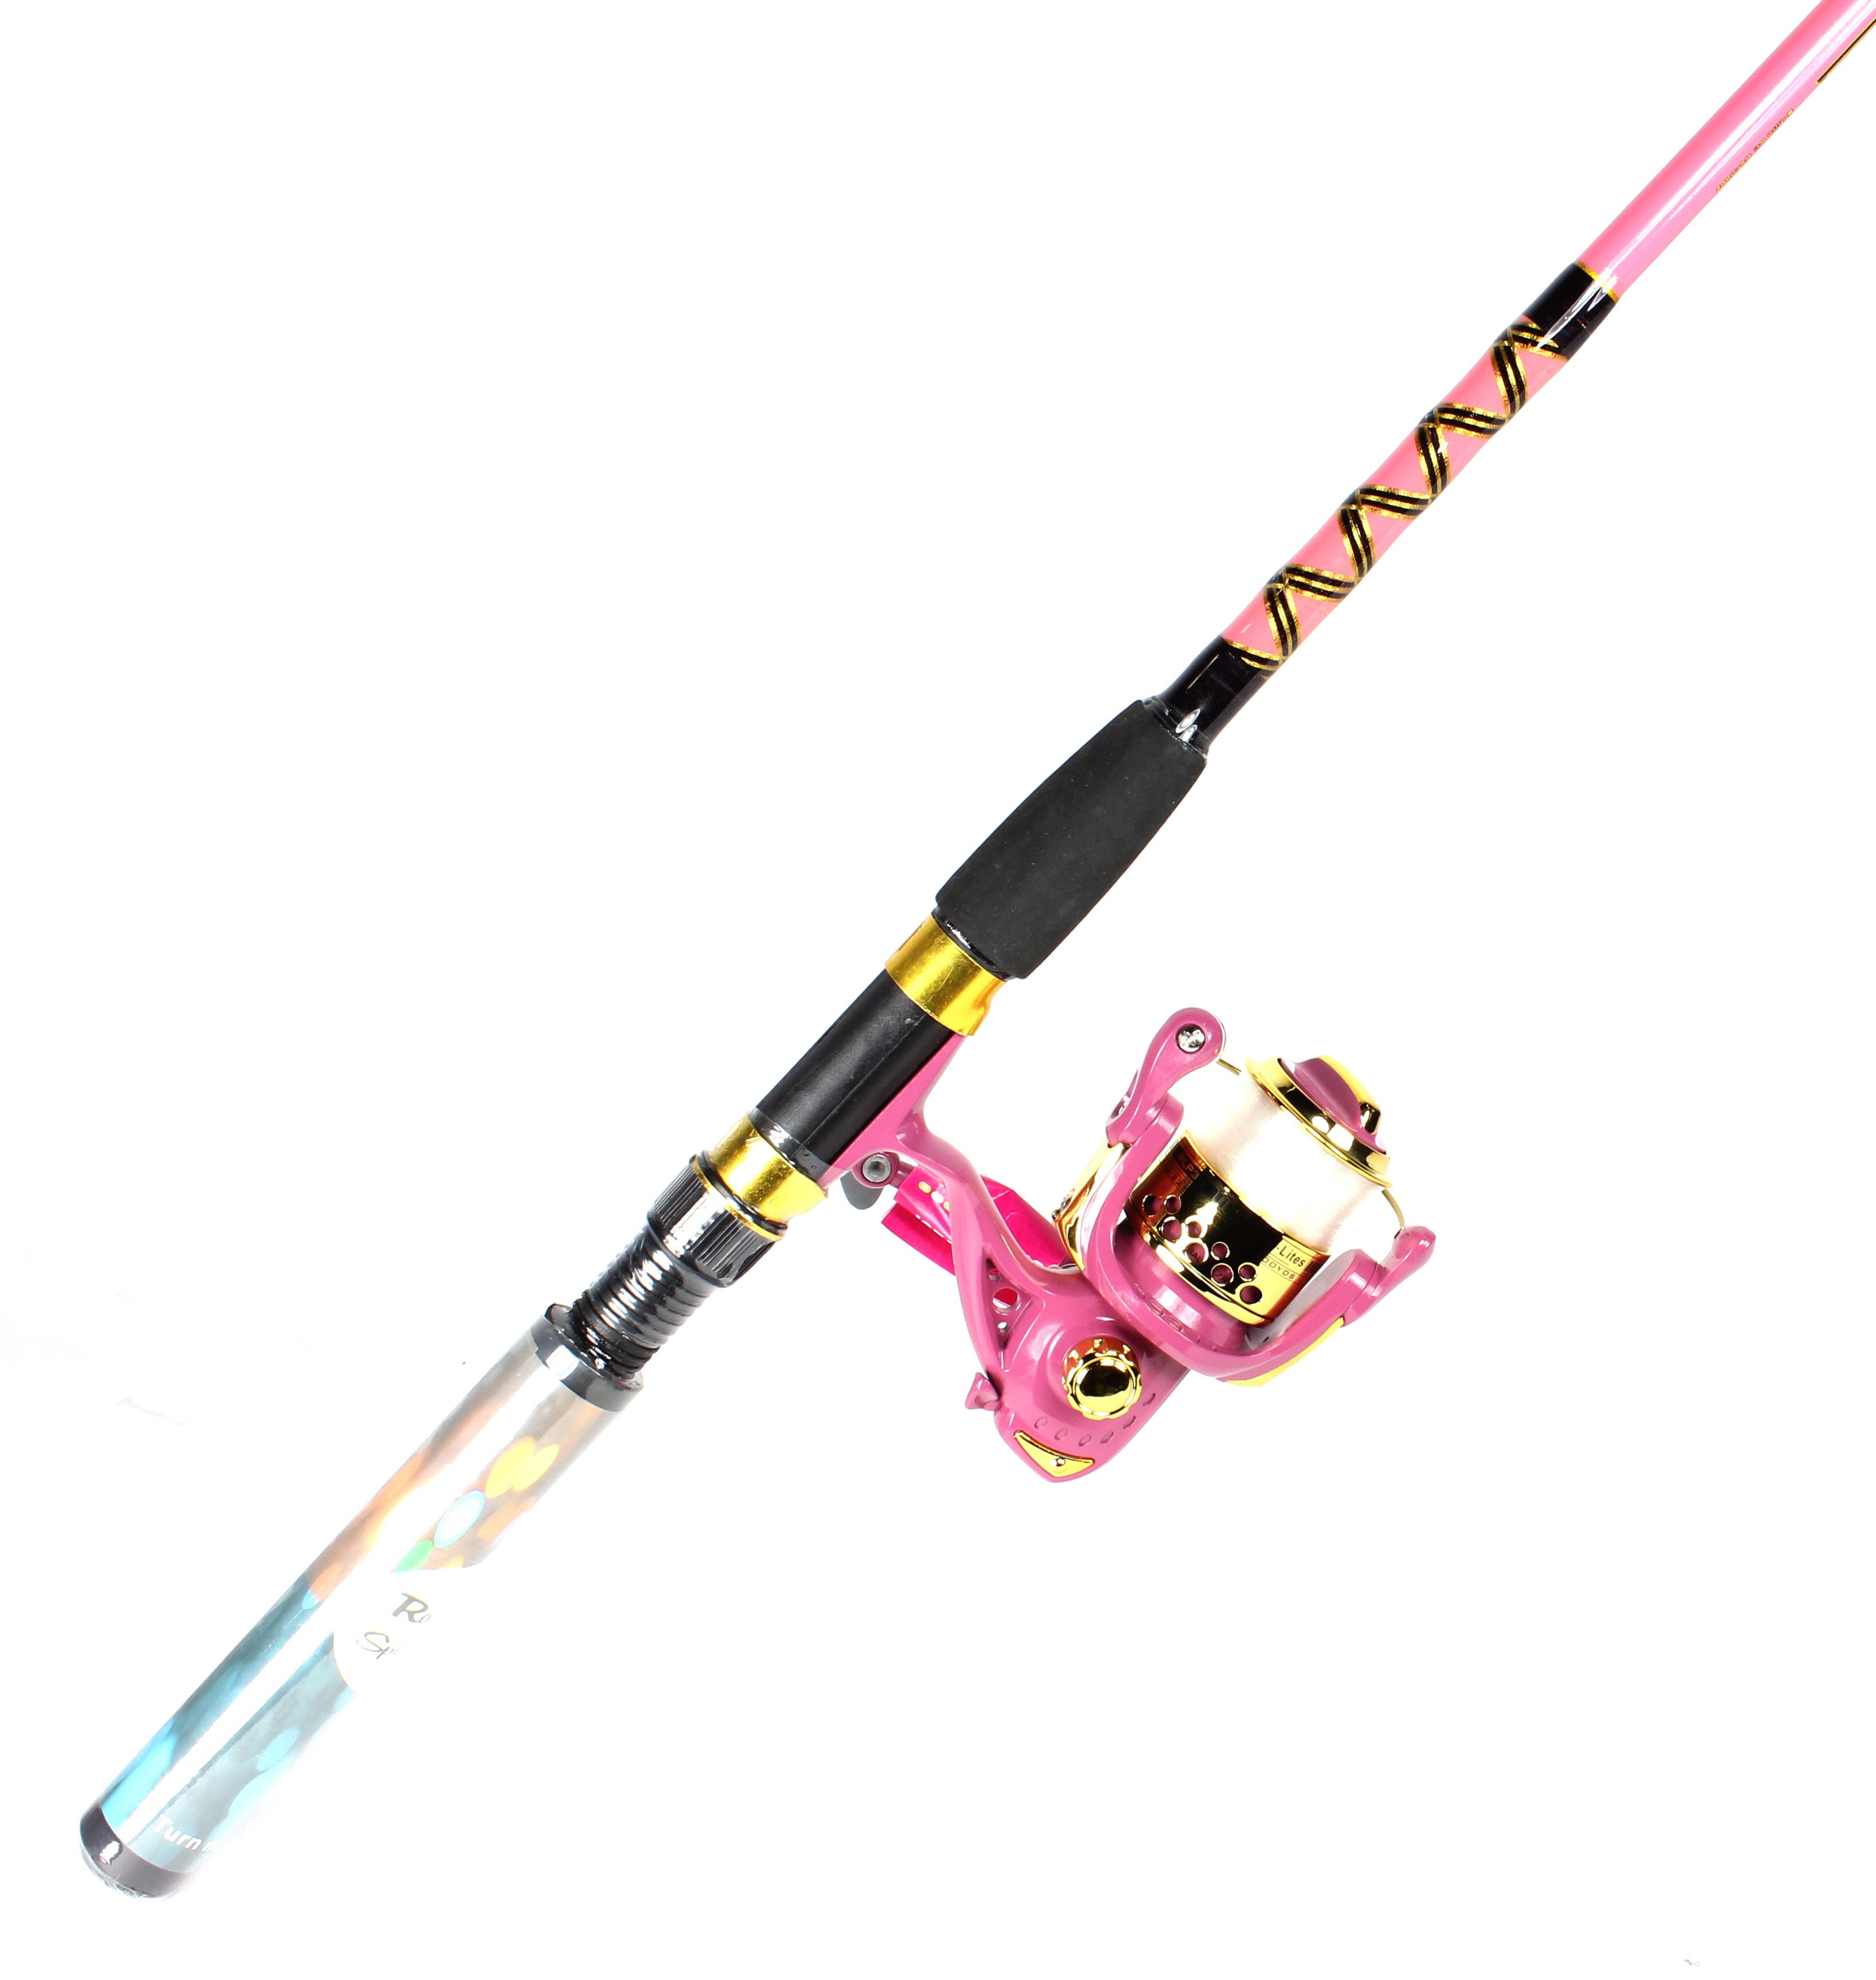 Light Up Fishing Rod And Reel